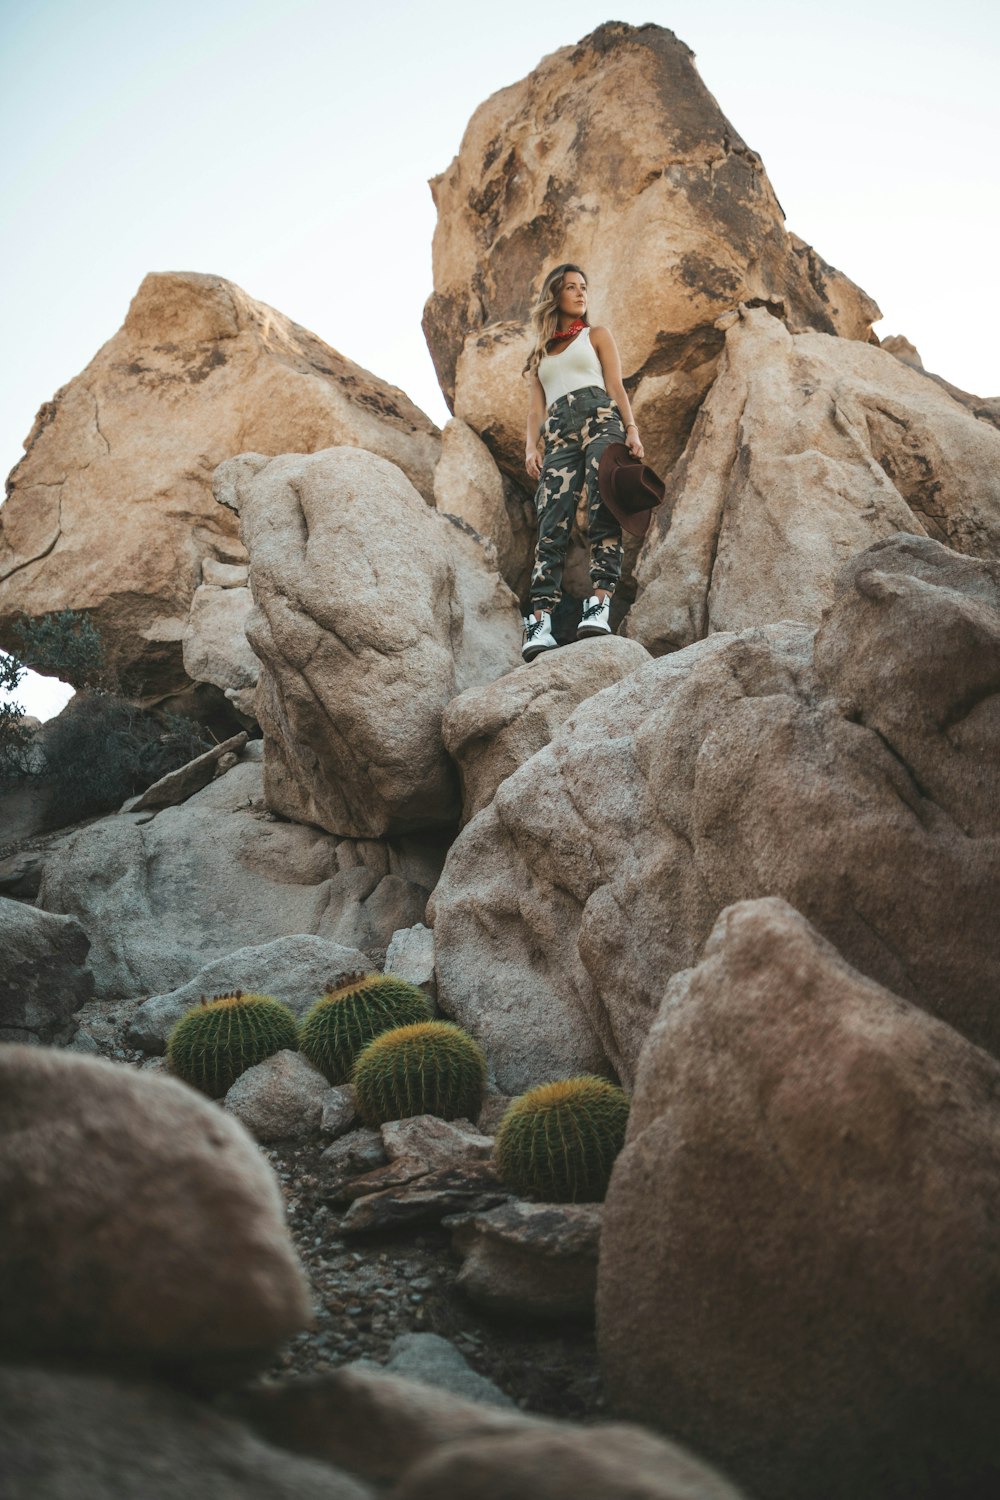 woman standing on rock formation near green cacti during daytime